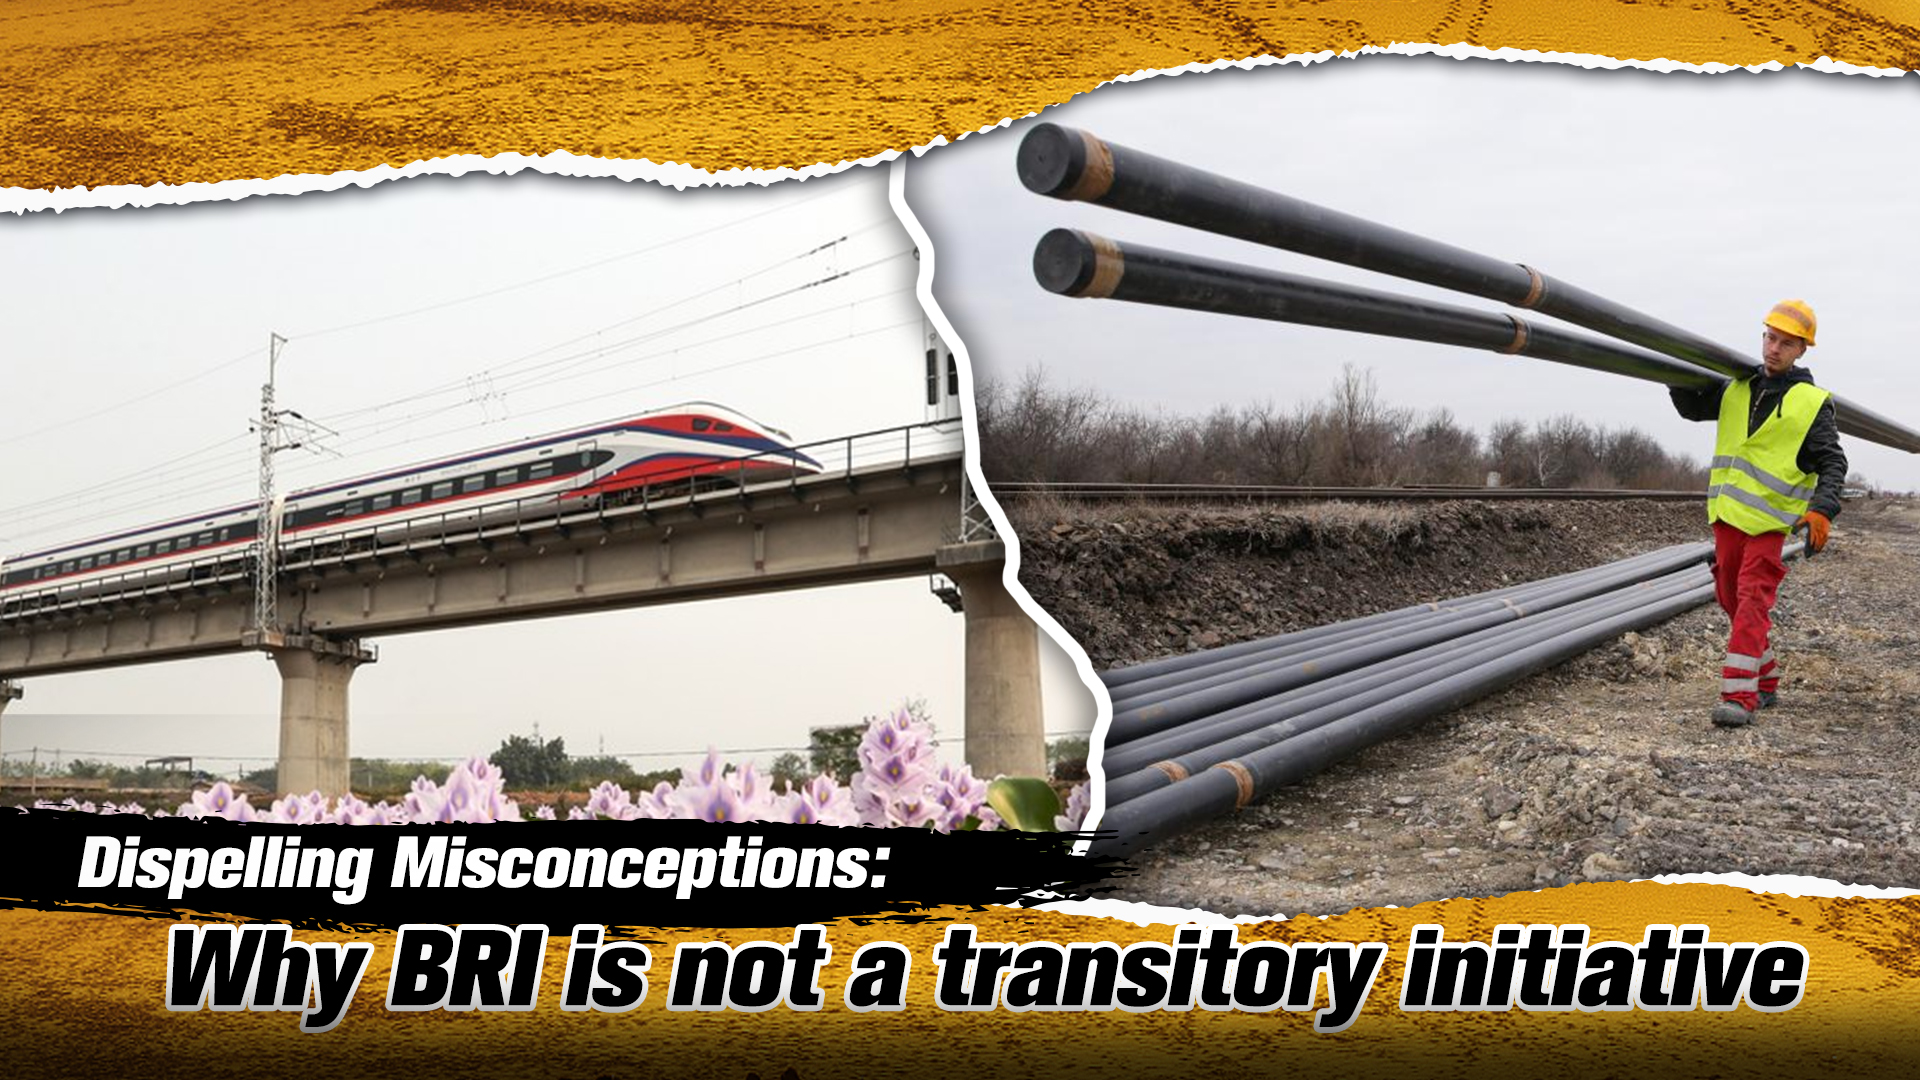 Dispelling Misconceptions: Why BRI is not a transitory initiative